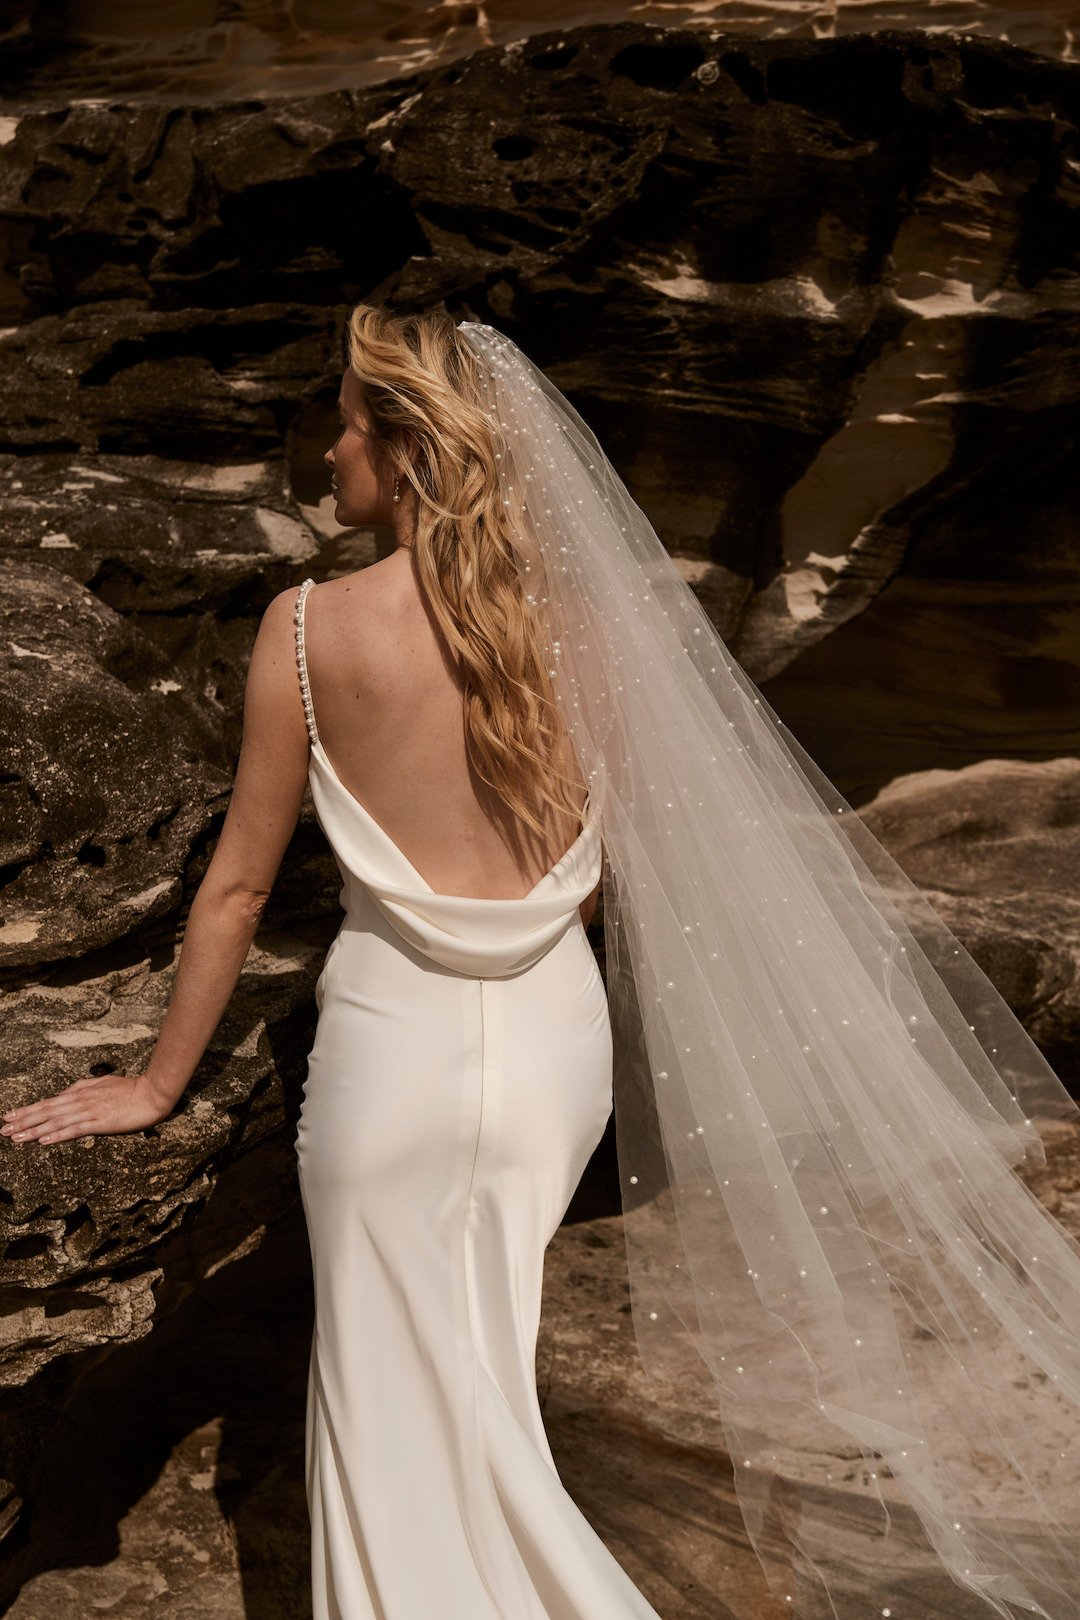 'The Oriana' Wedding Dress  Textured Satin, Low Cowl Back, and Pearl Strap - Edited.jpg